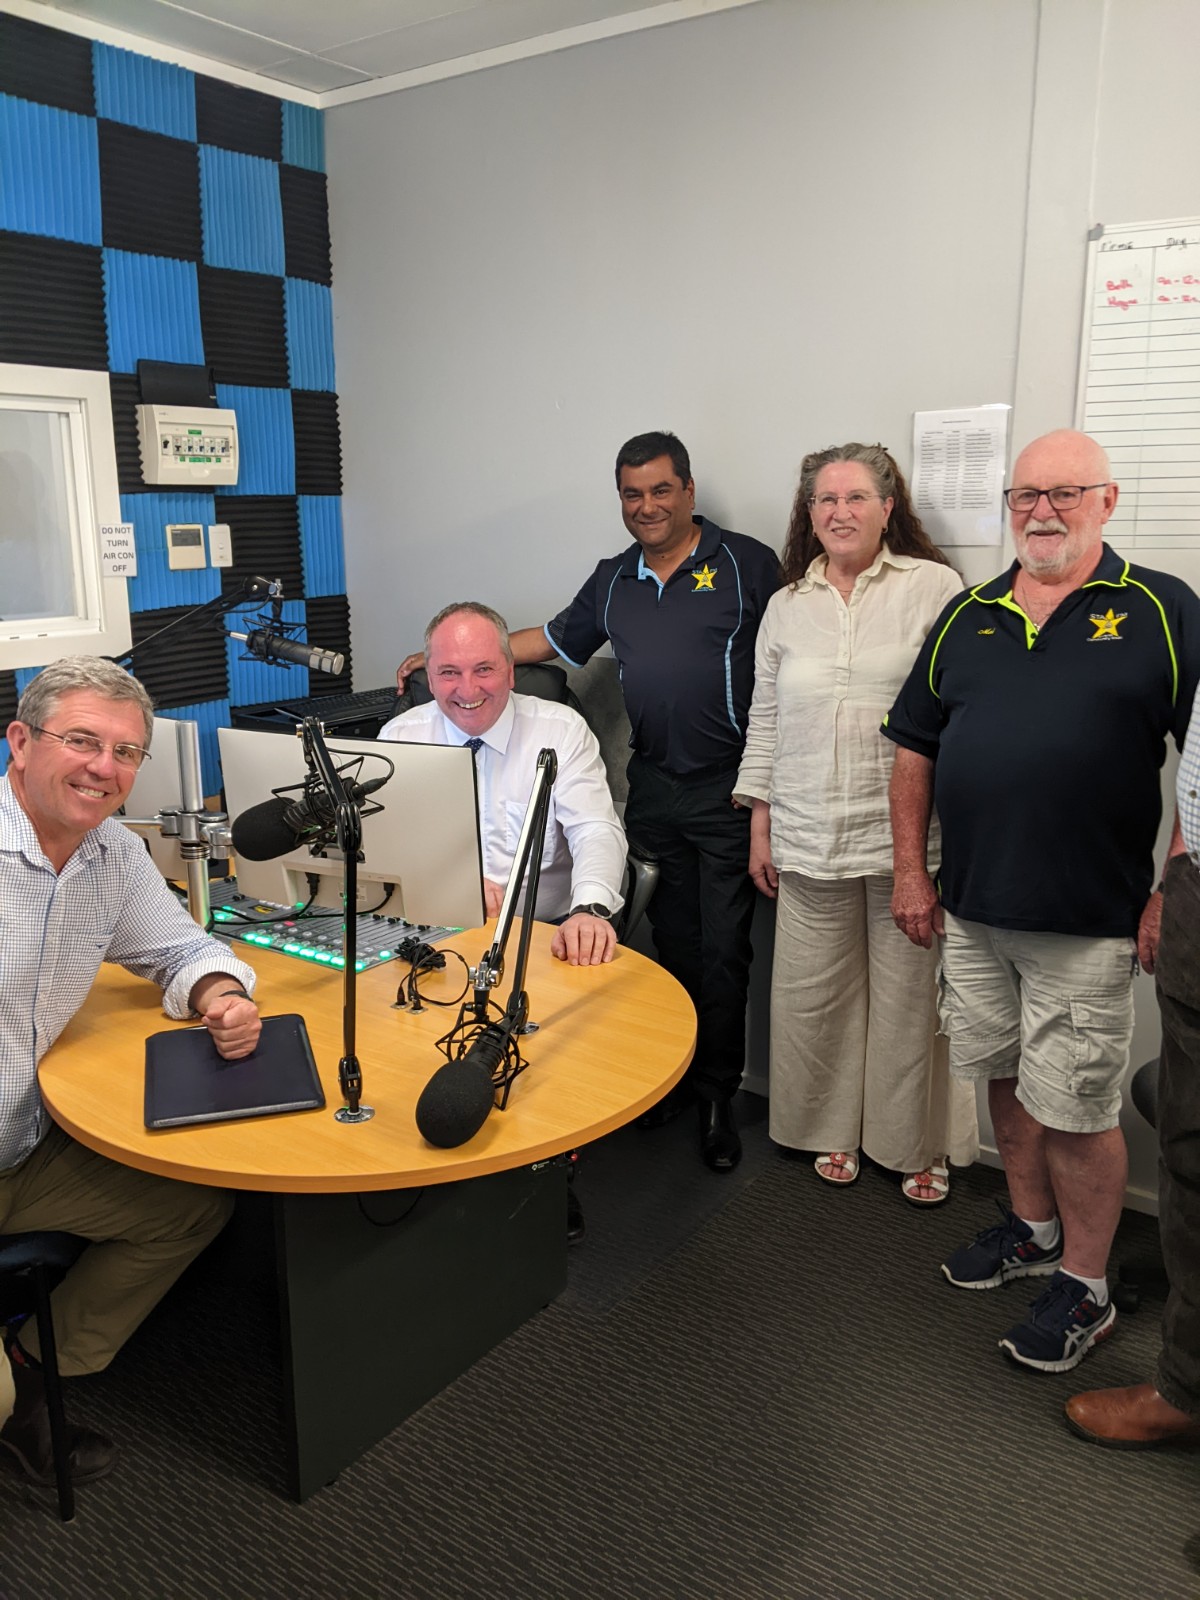 A photo of Barnaby Joyce and David Gillespie sitting at the studio desk with Sta FM workers standing beside them